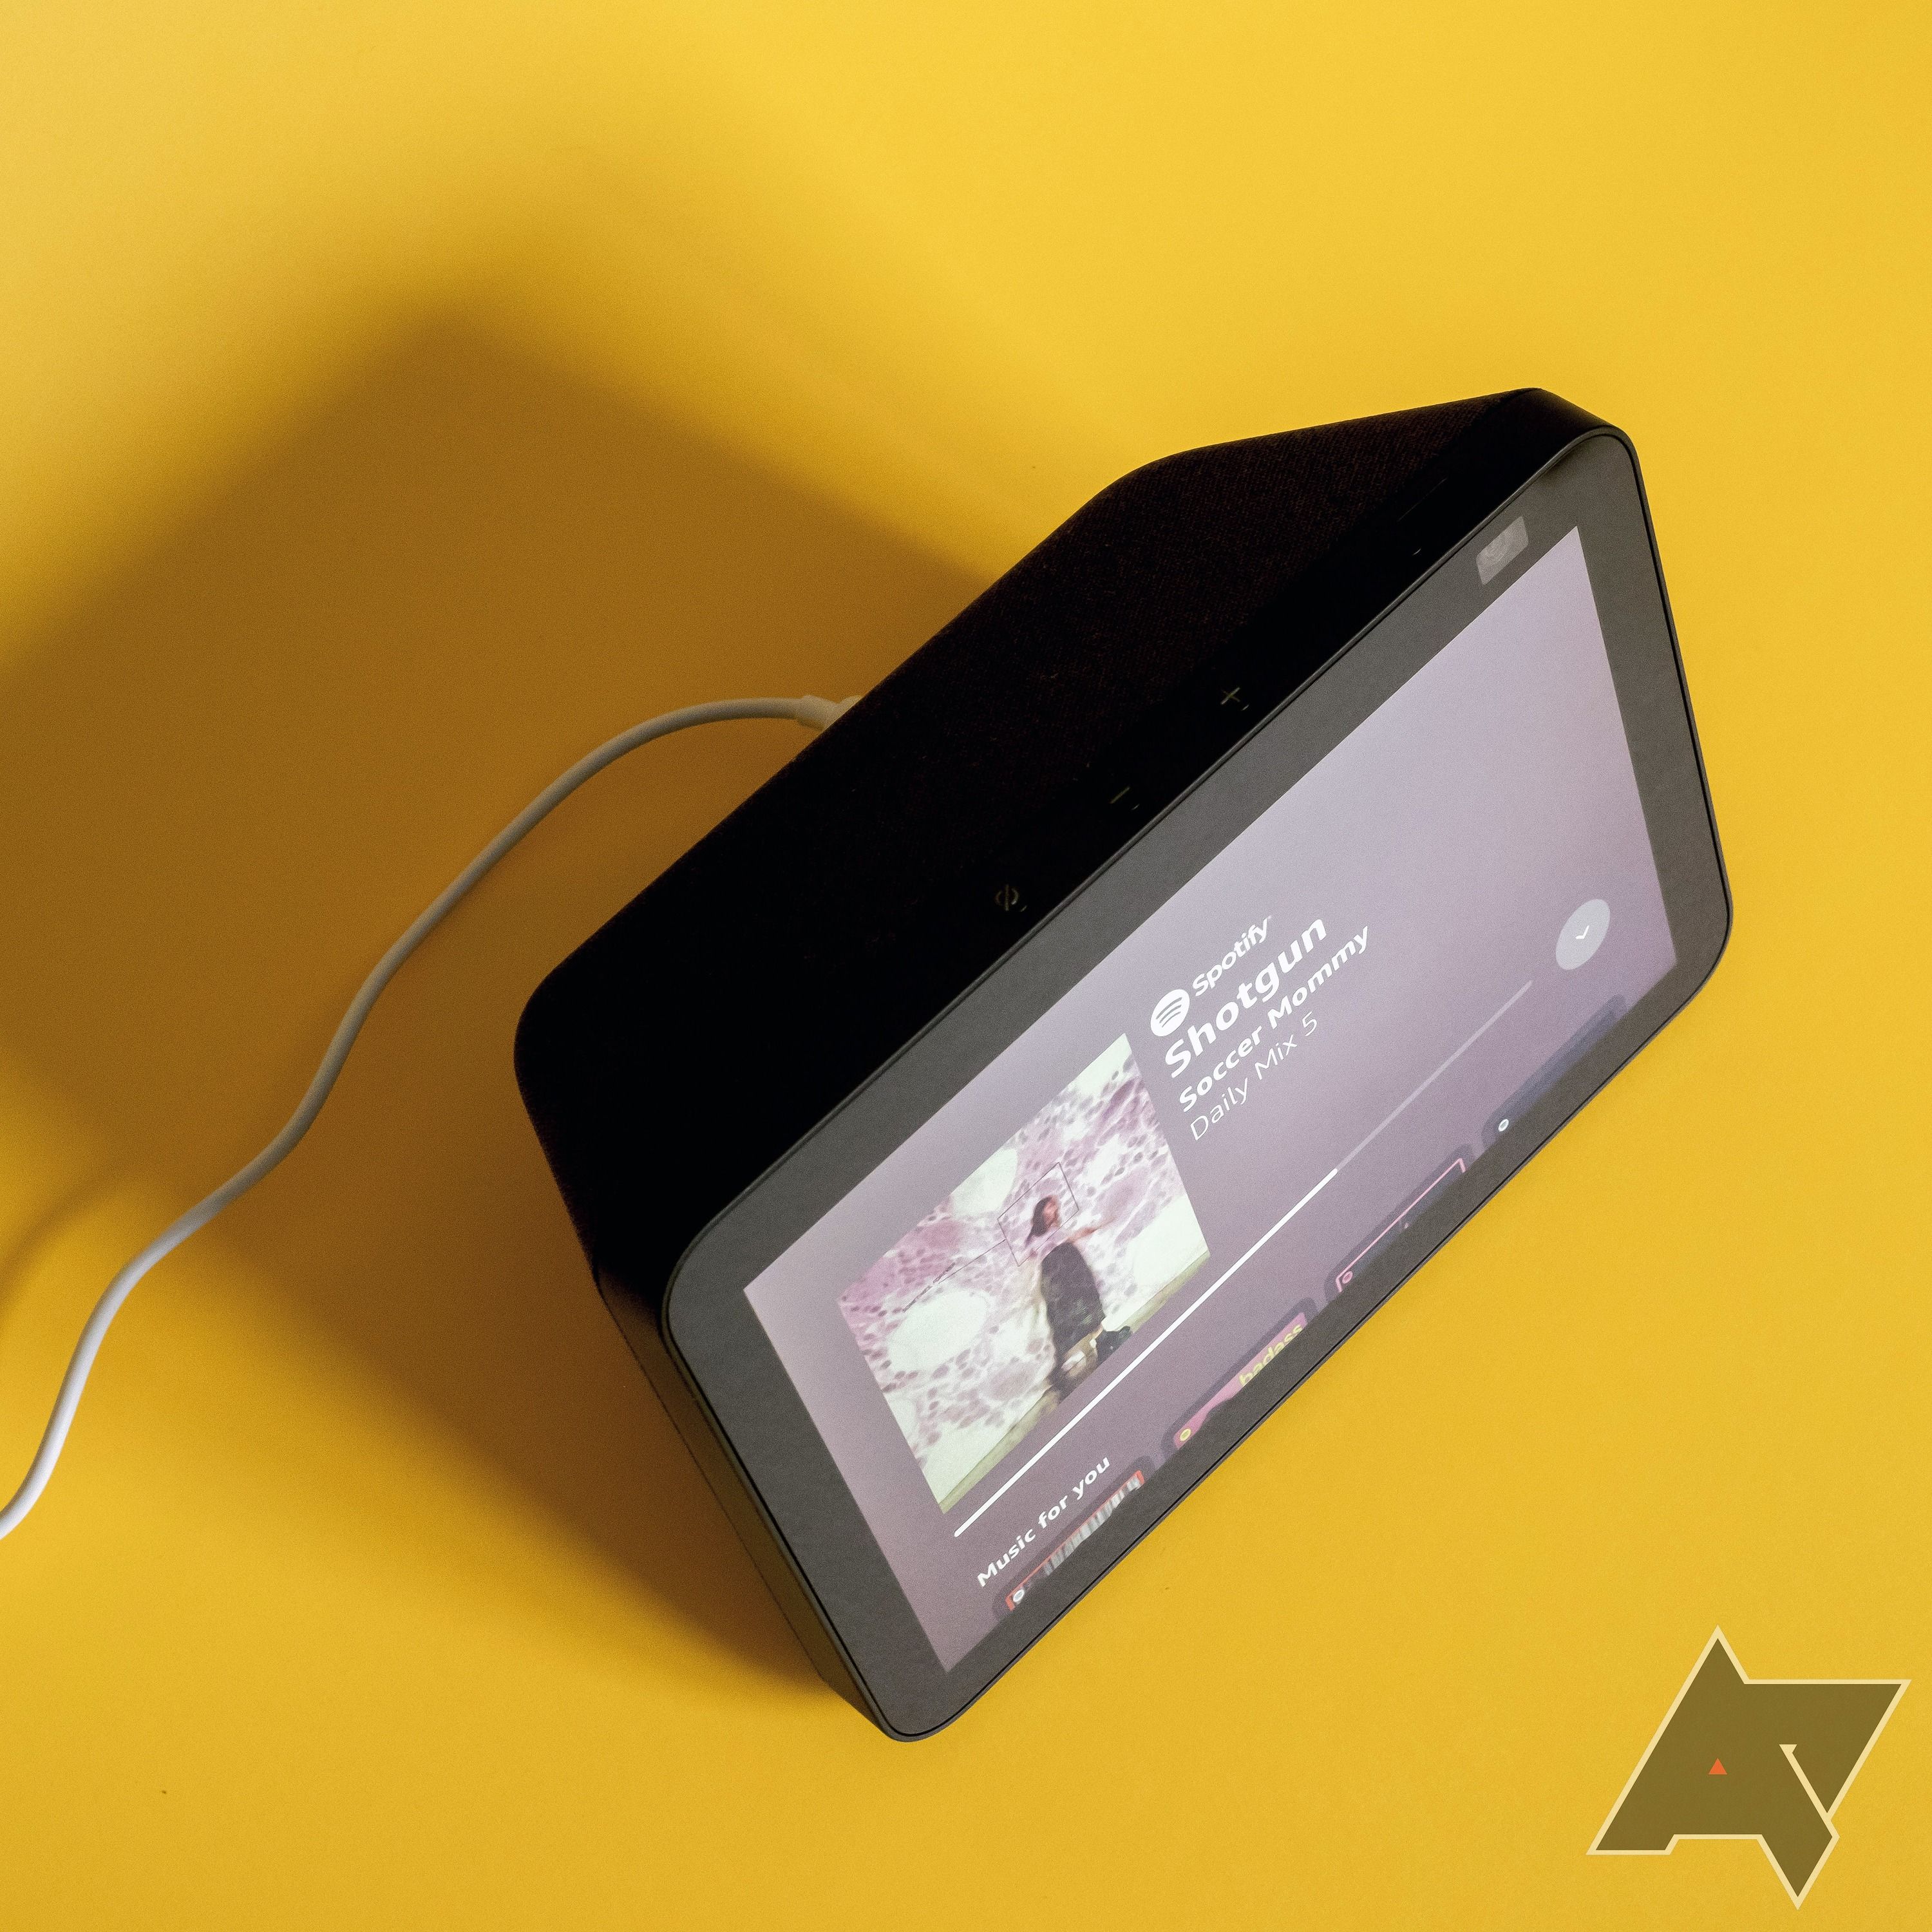 Top view of a second generation Amazon Echo Show 8 placed on a yellow surface